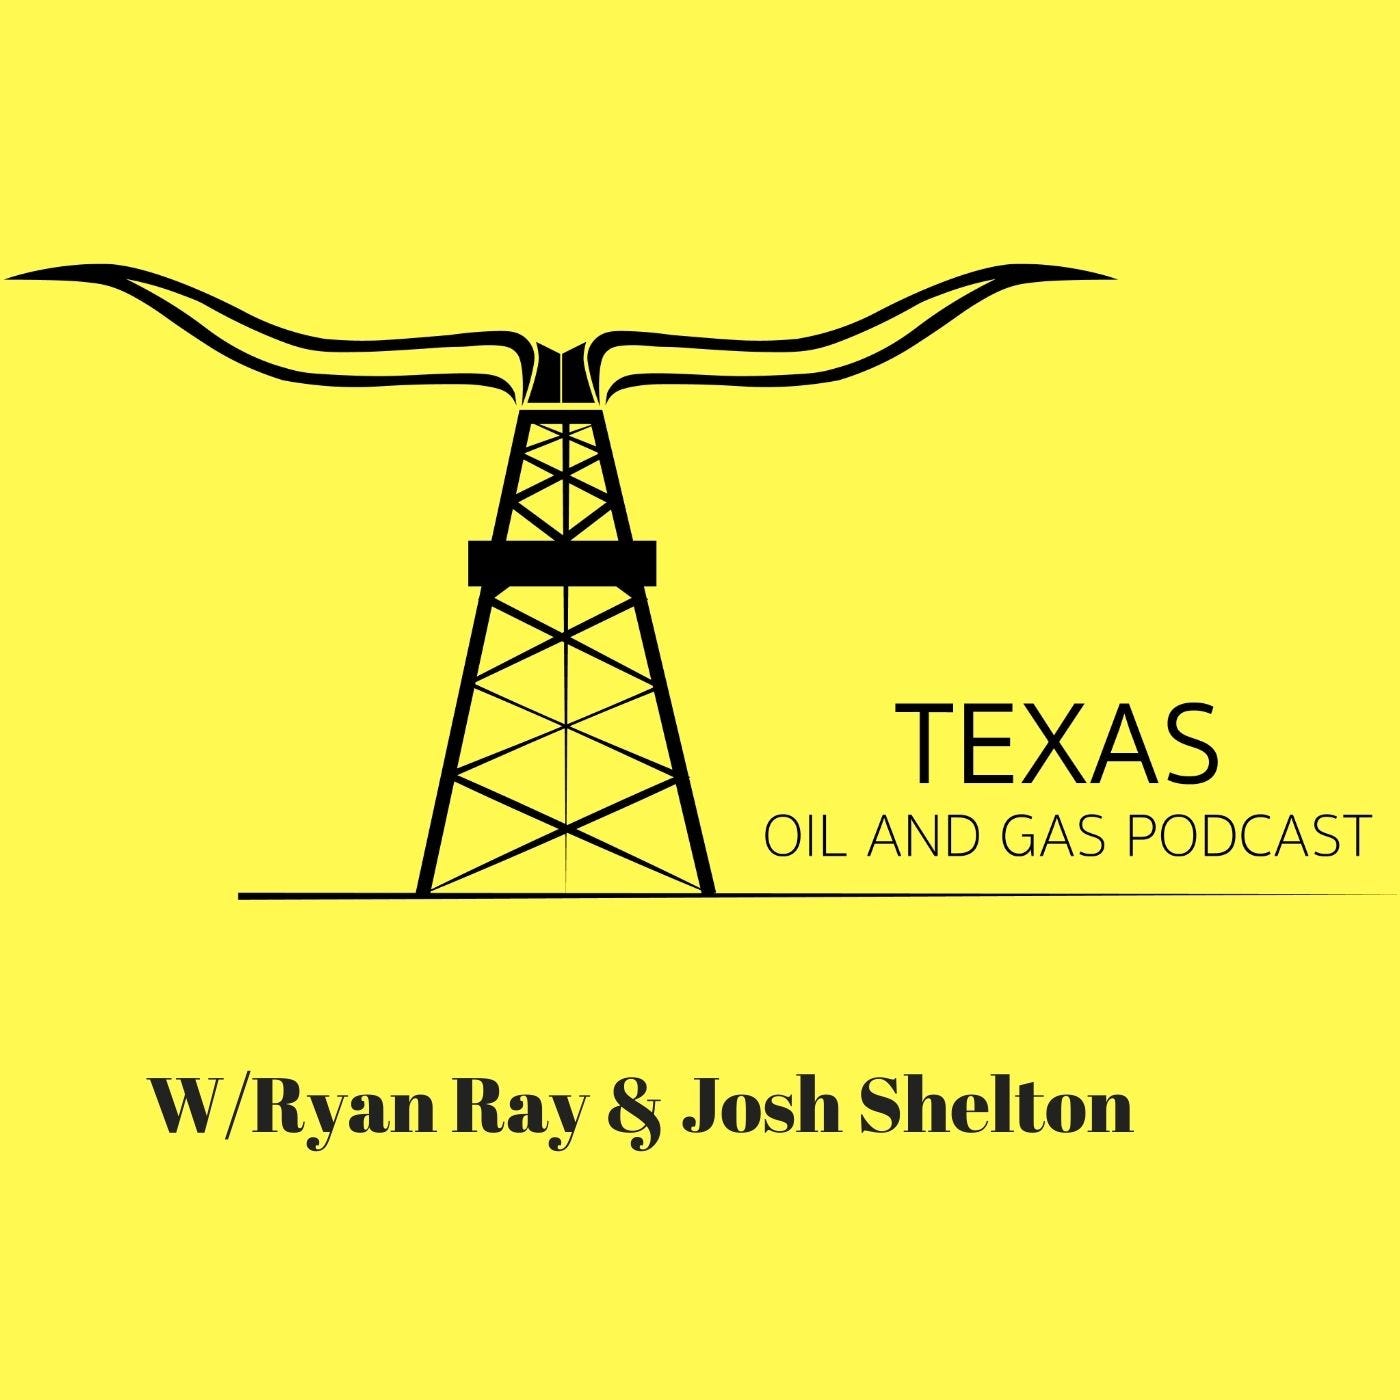 Episode 218 - Jay Young talks about demand, taxes, and regulatory burdens